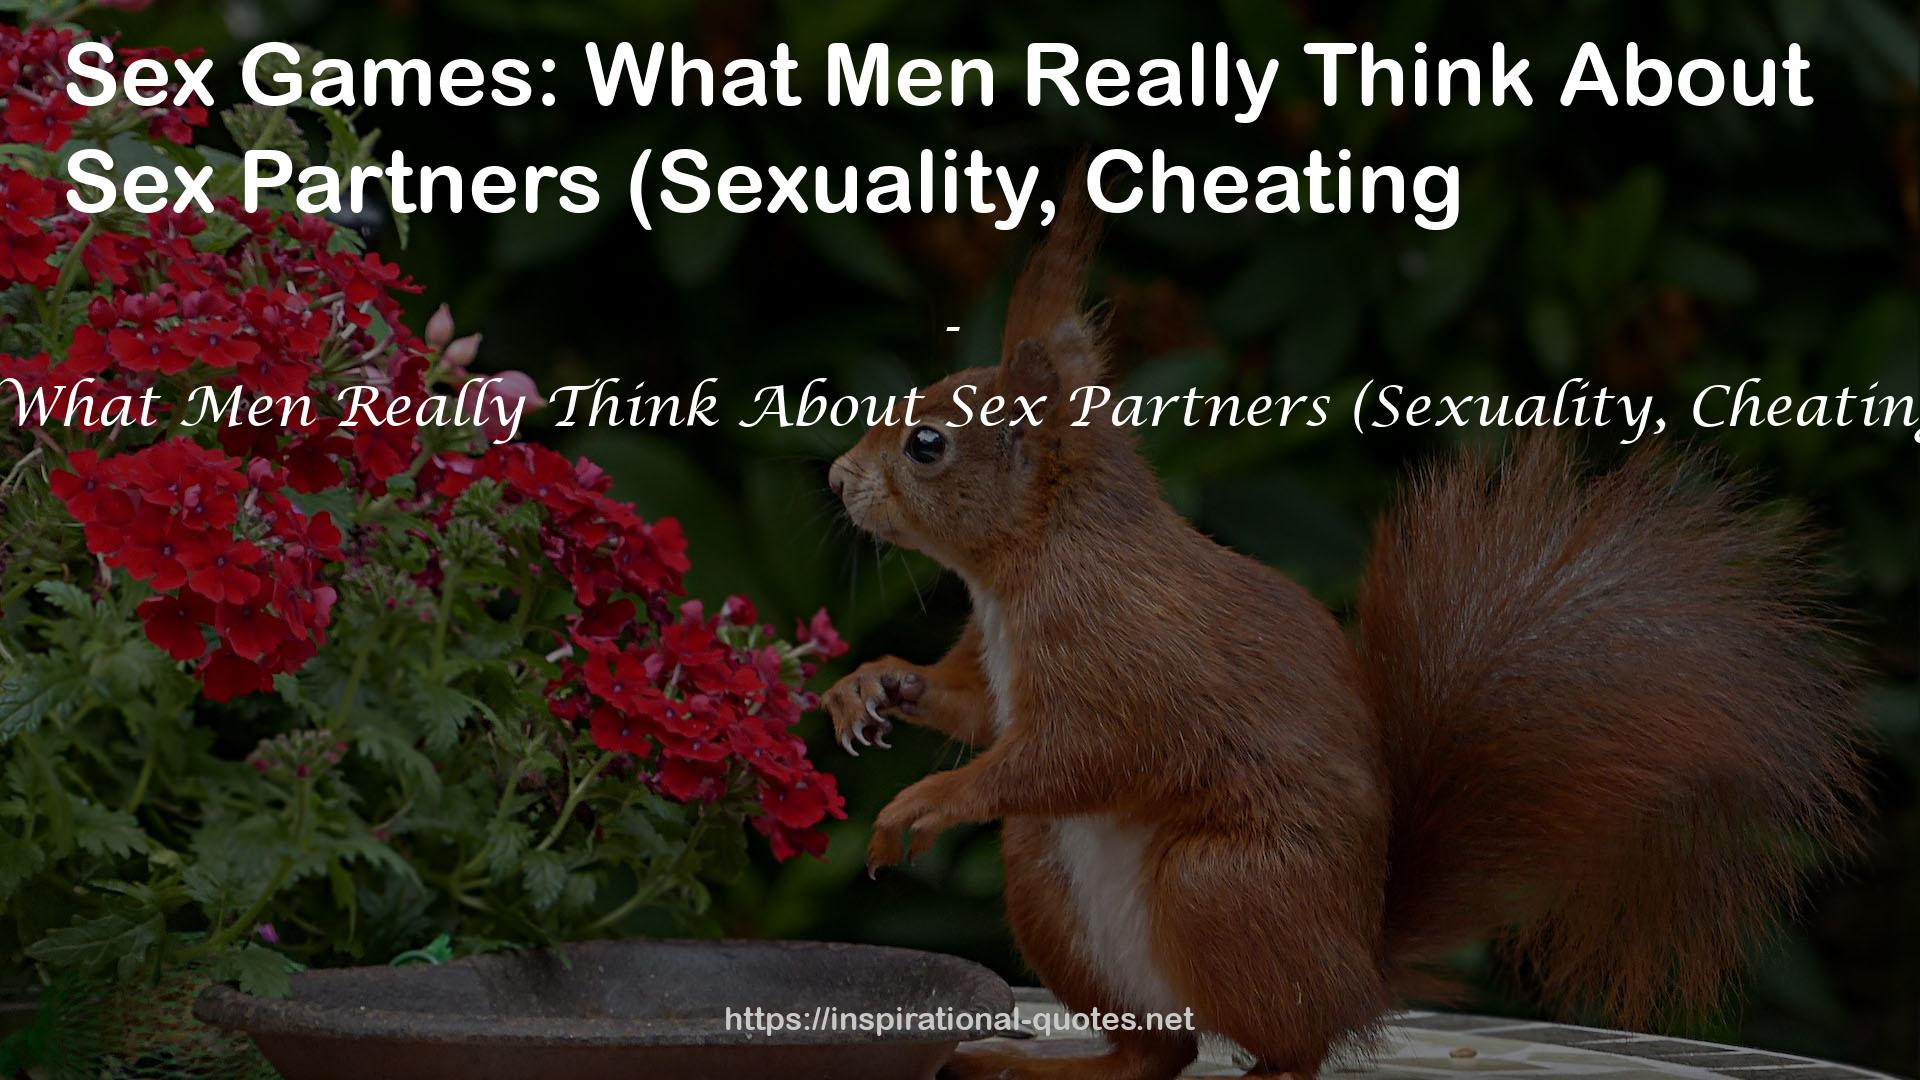 Sex Games: What Men Really Think About Sex Partners (Sexuality, Cheating, Self-Help) QUOTES